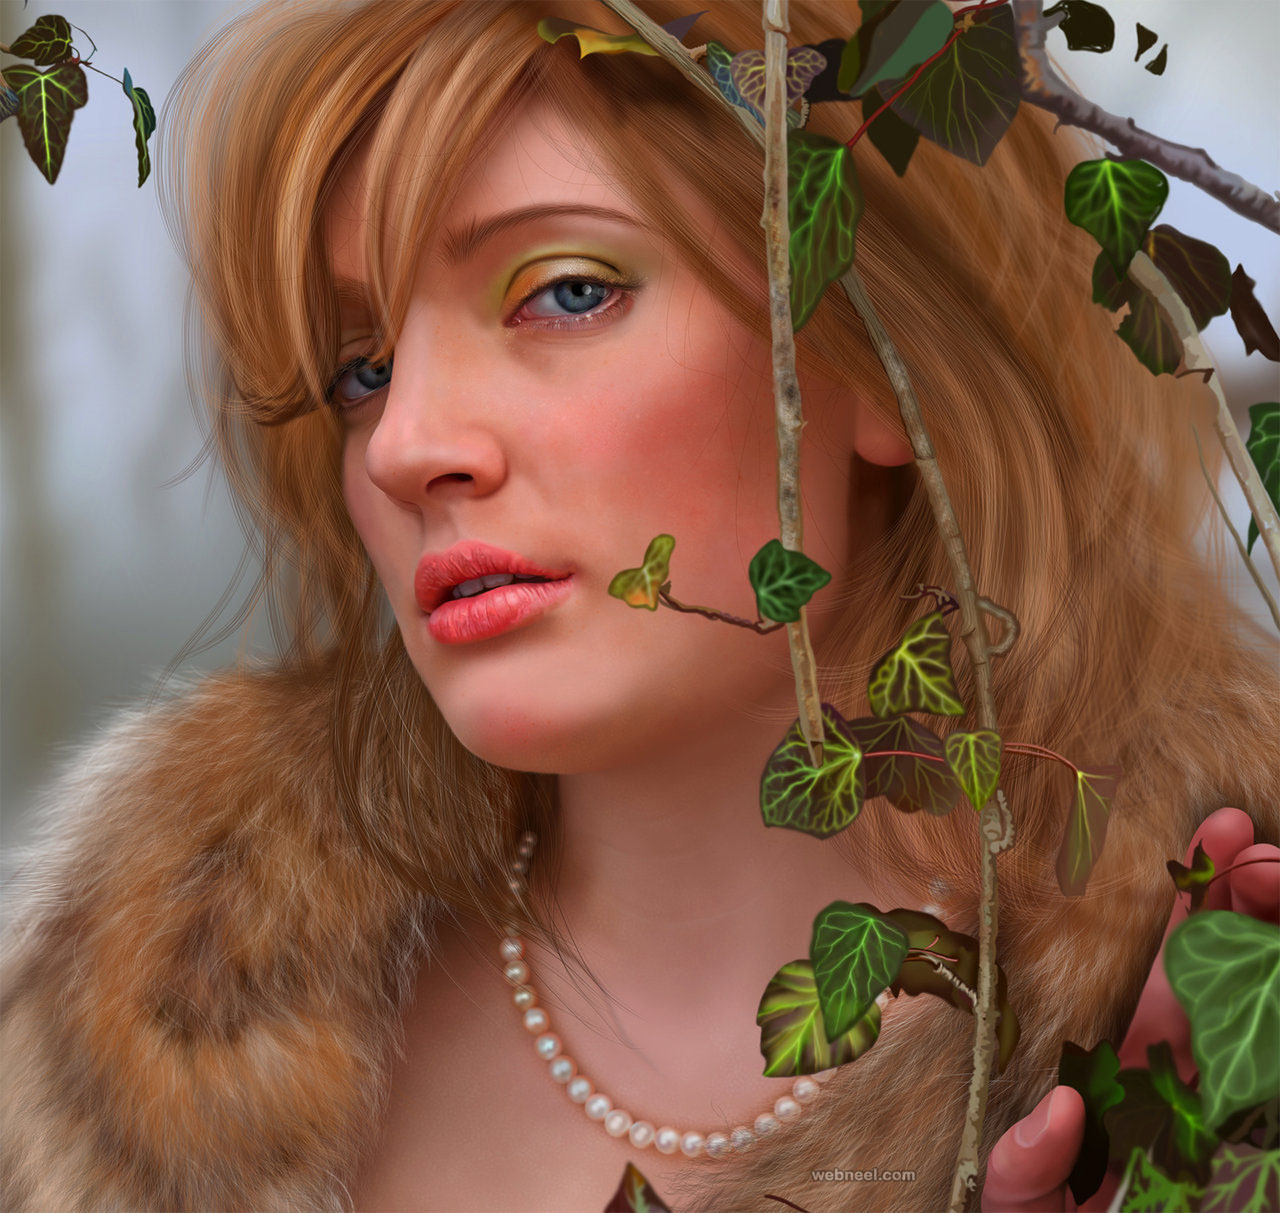 6 realistic digital painting by newberry